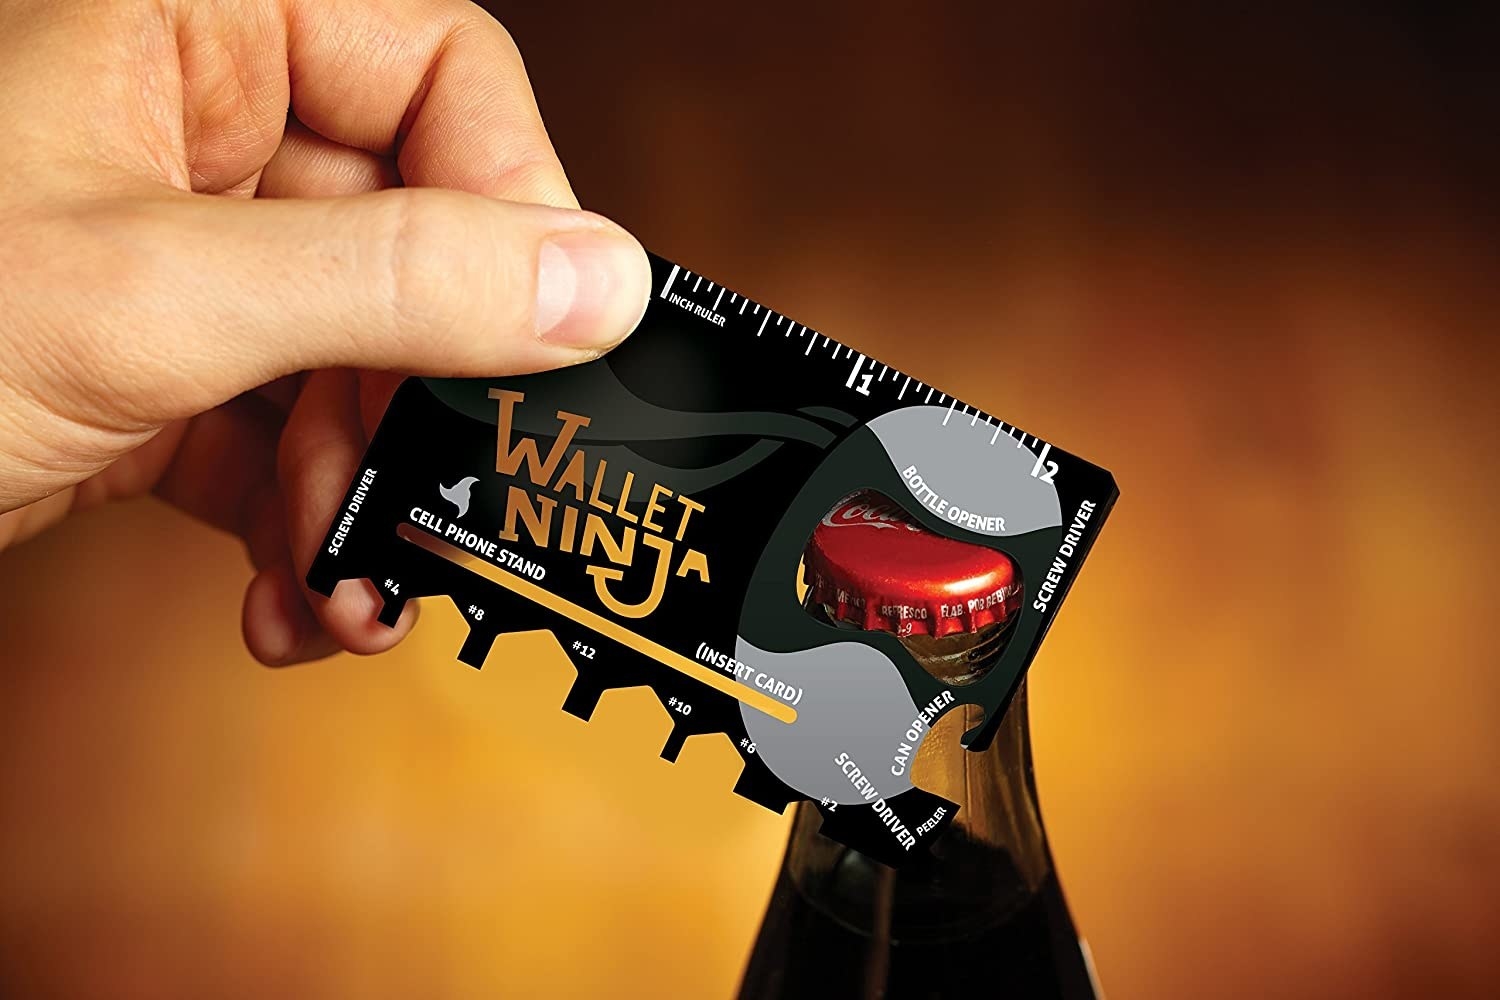 Hand uses black 18-in-1 multi-purpose pocket tool to open beer bottle